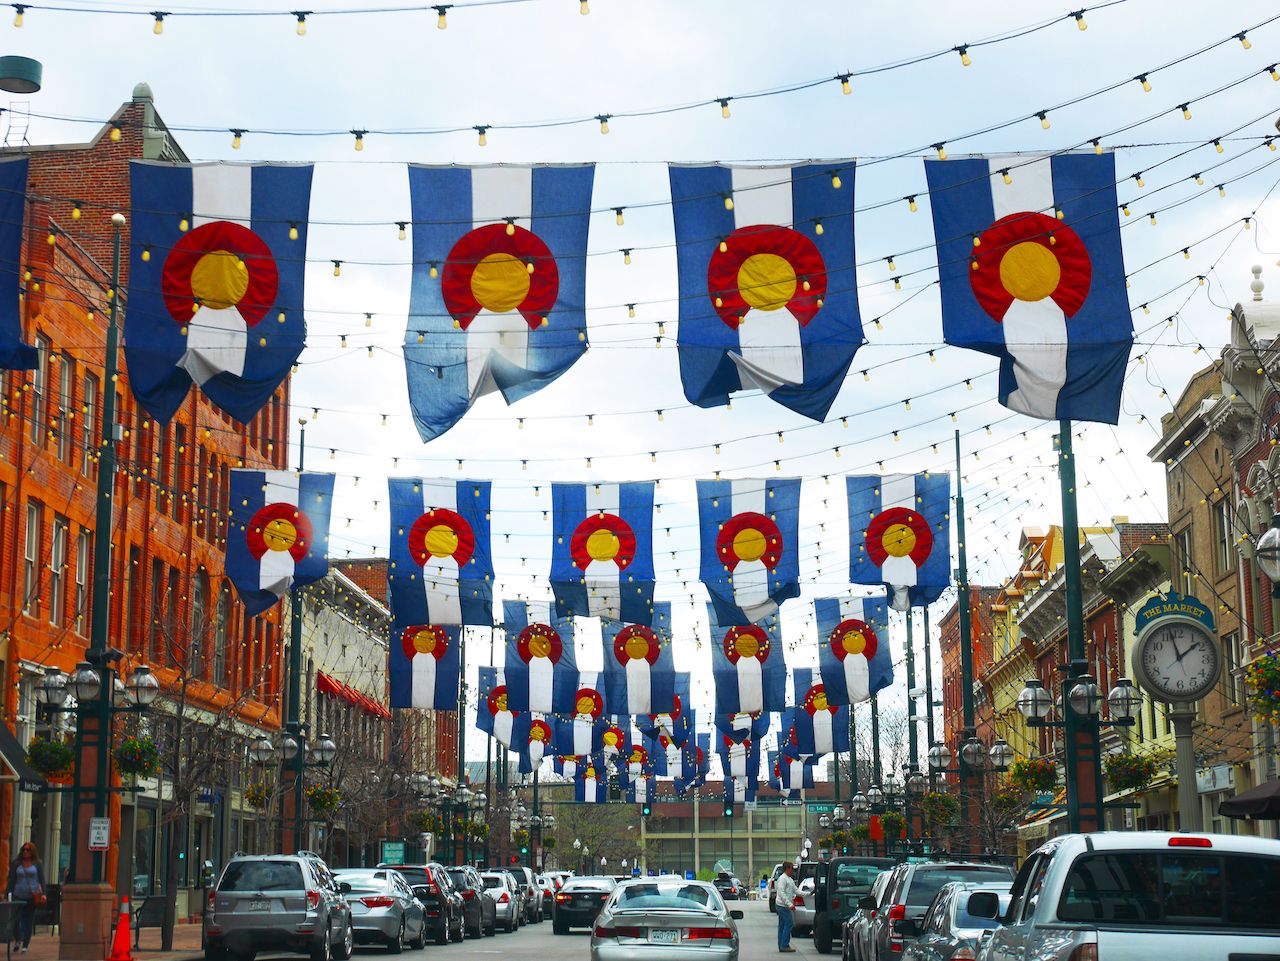 Traffic in downtown Denver with cars and hanging state flags